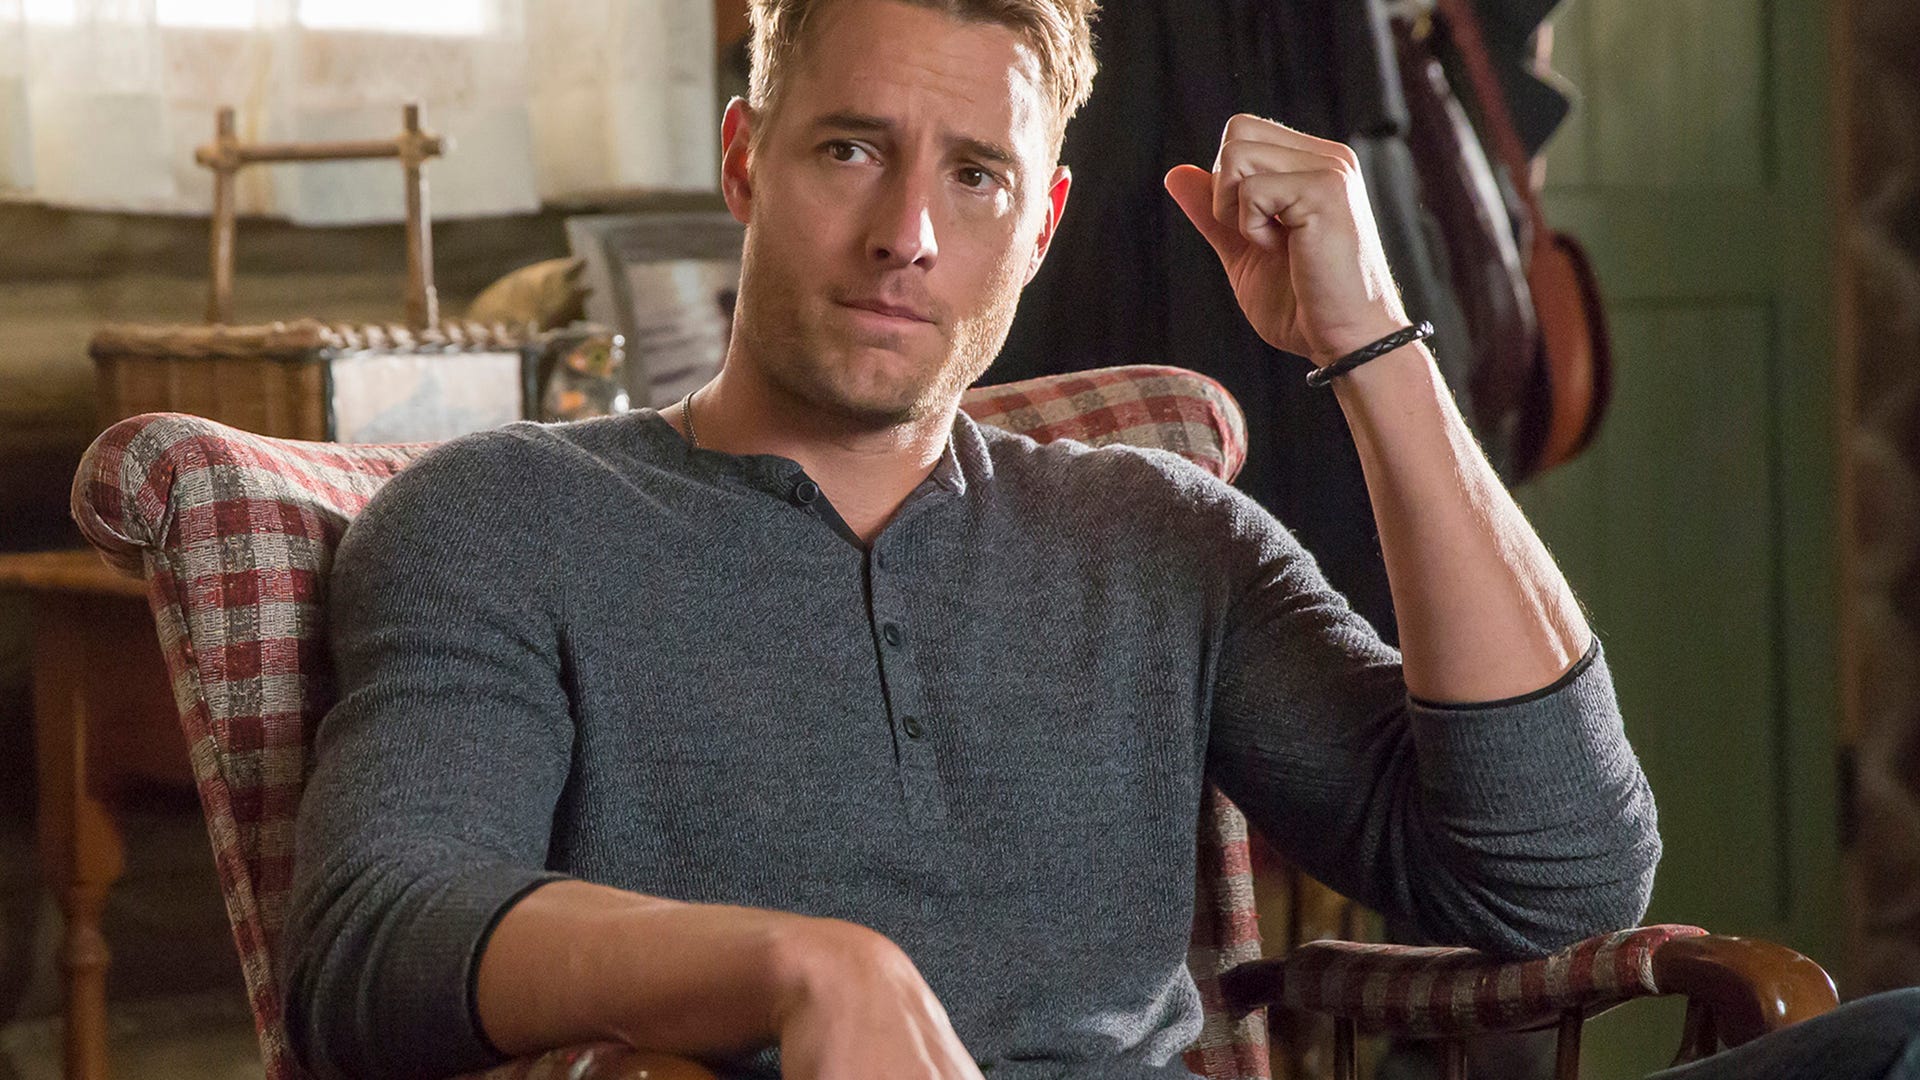 Justin Hartley, This Is Us​